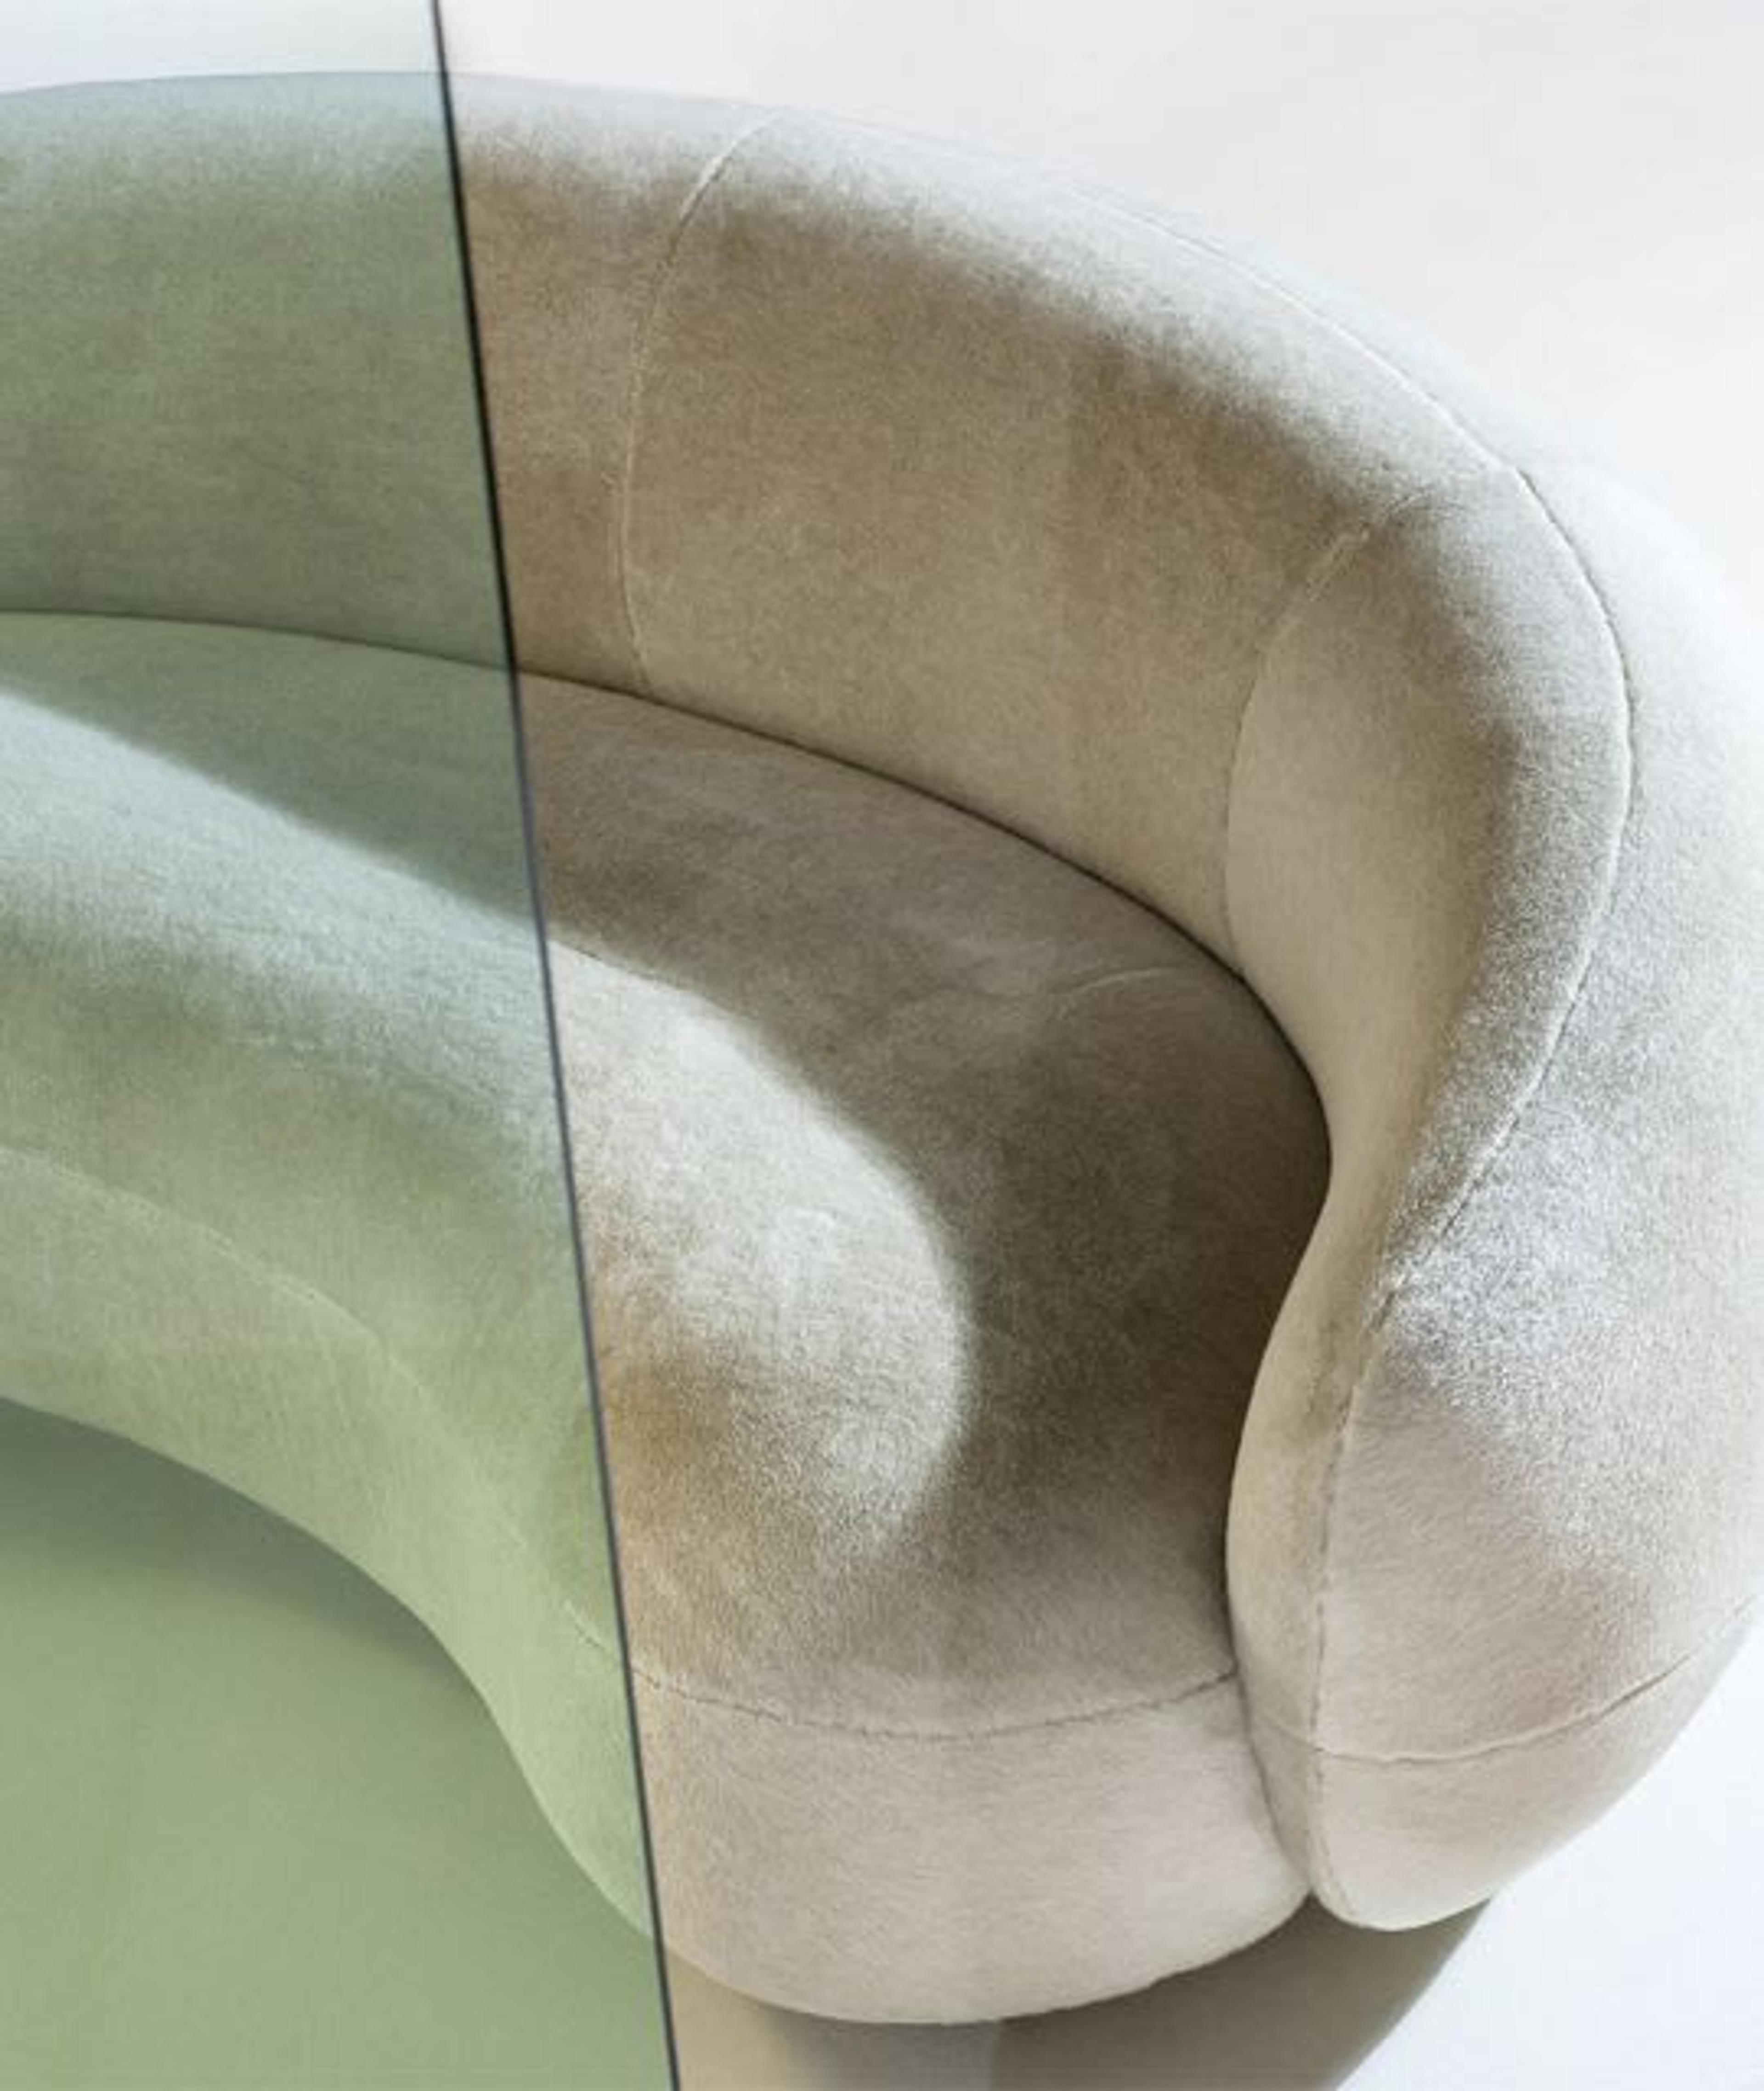 Curved details of the Julep sofa by Tacchini